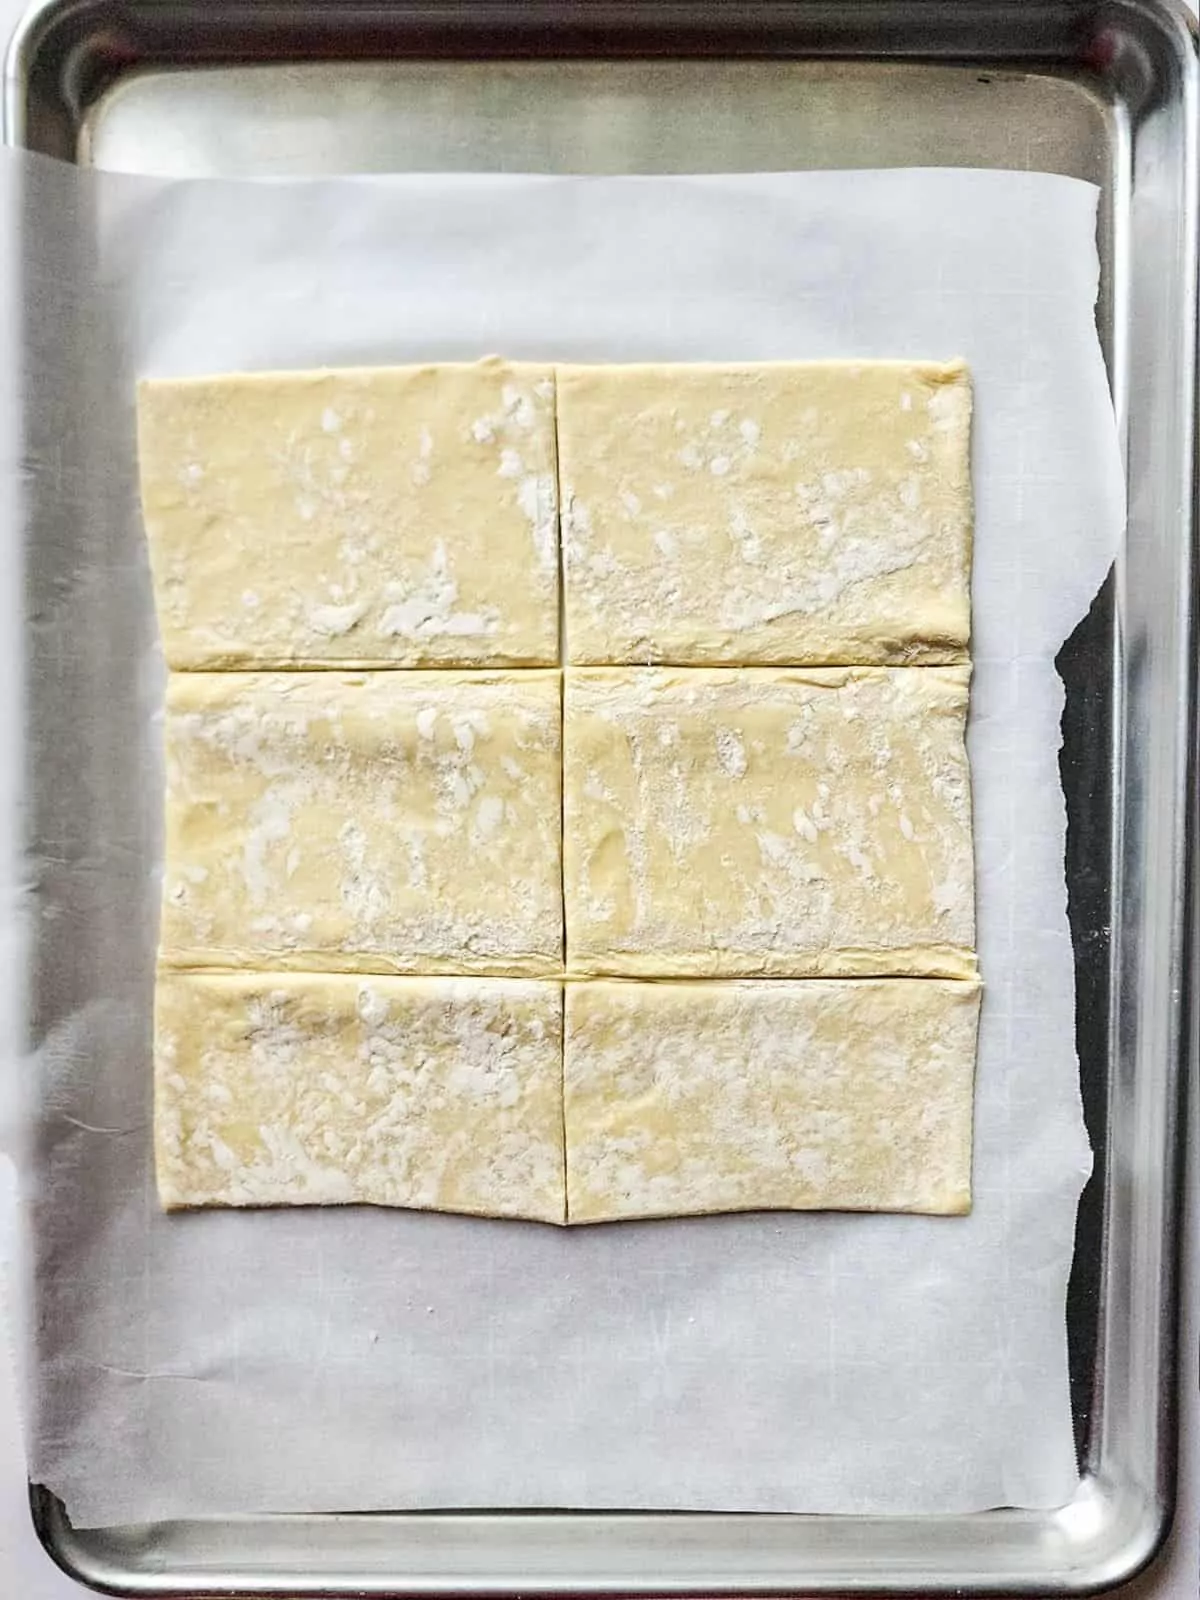 puff pastry cut into rectangles.